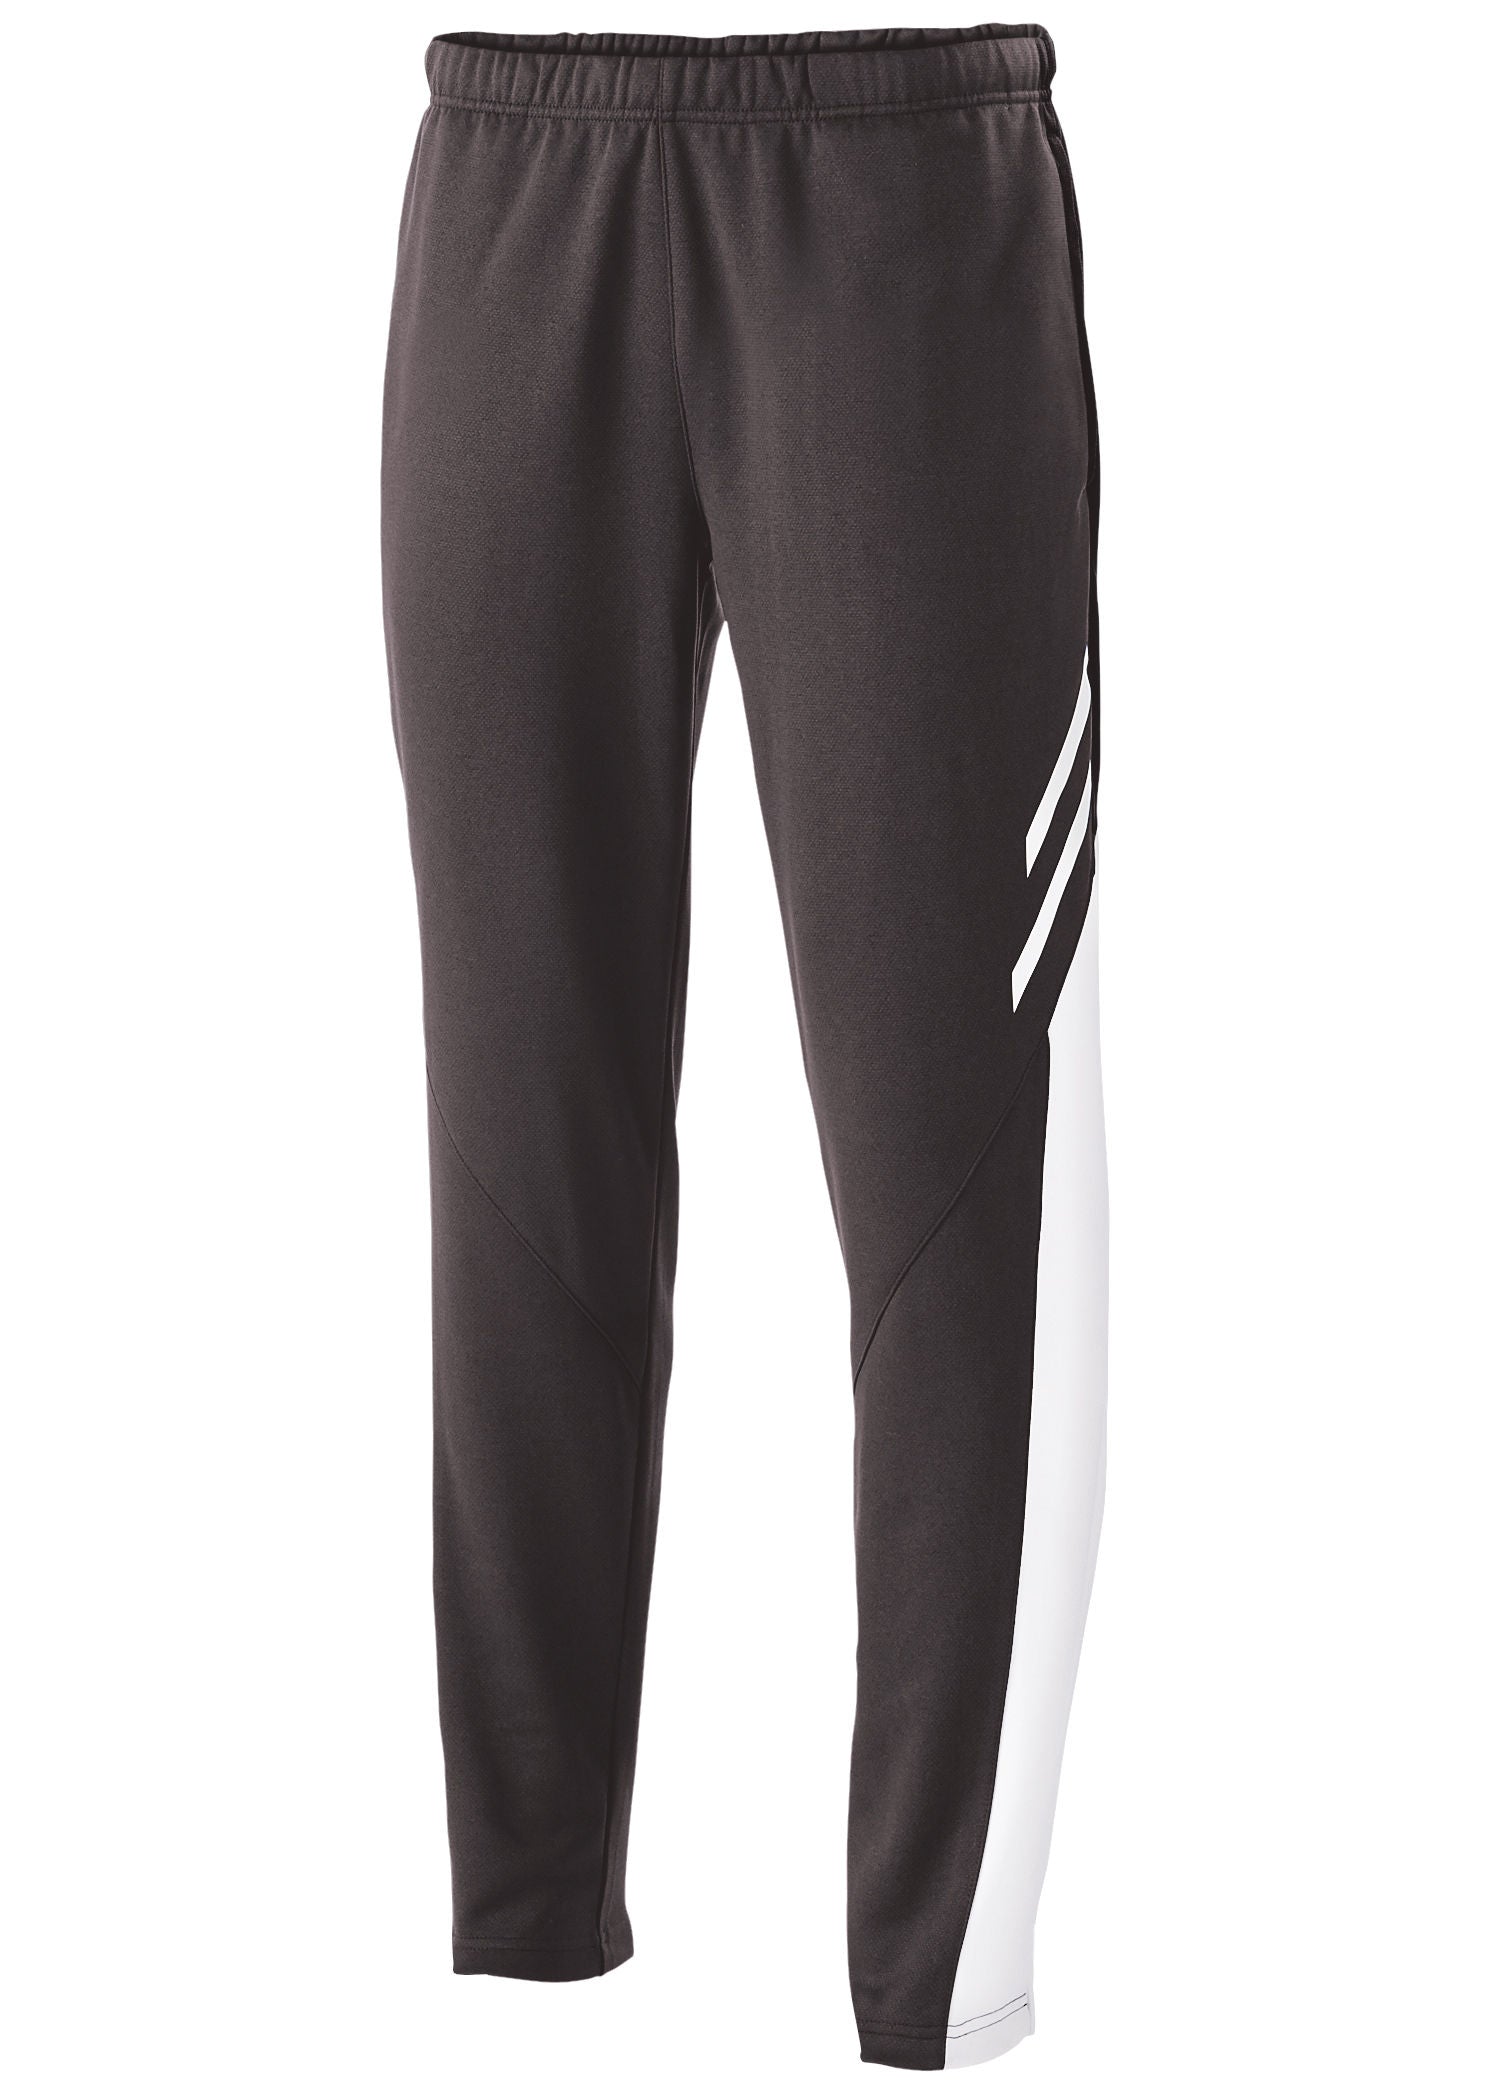 Holloway Flux Tapered Leg Pant in Black Heather/White/White  -Part of the Adult, Adult-Pants, Pants, Holloway, Flux-Collection product lines at KanaleyCreations.com